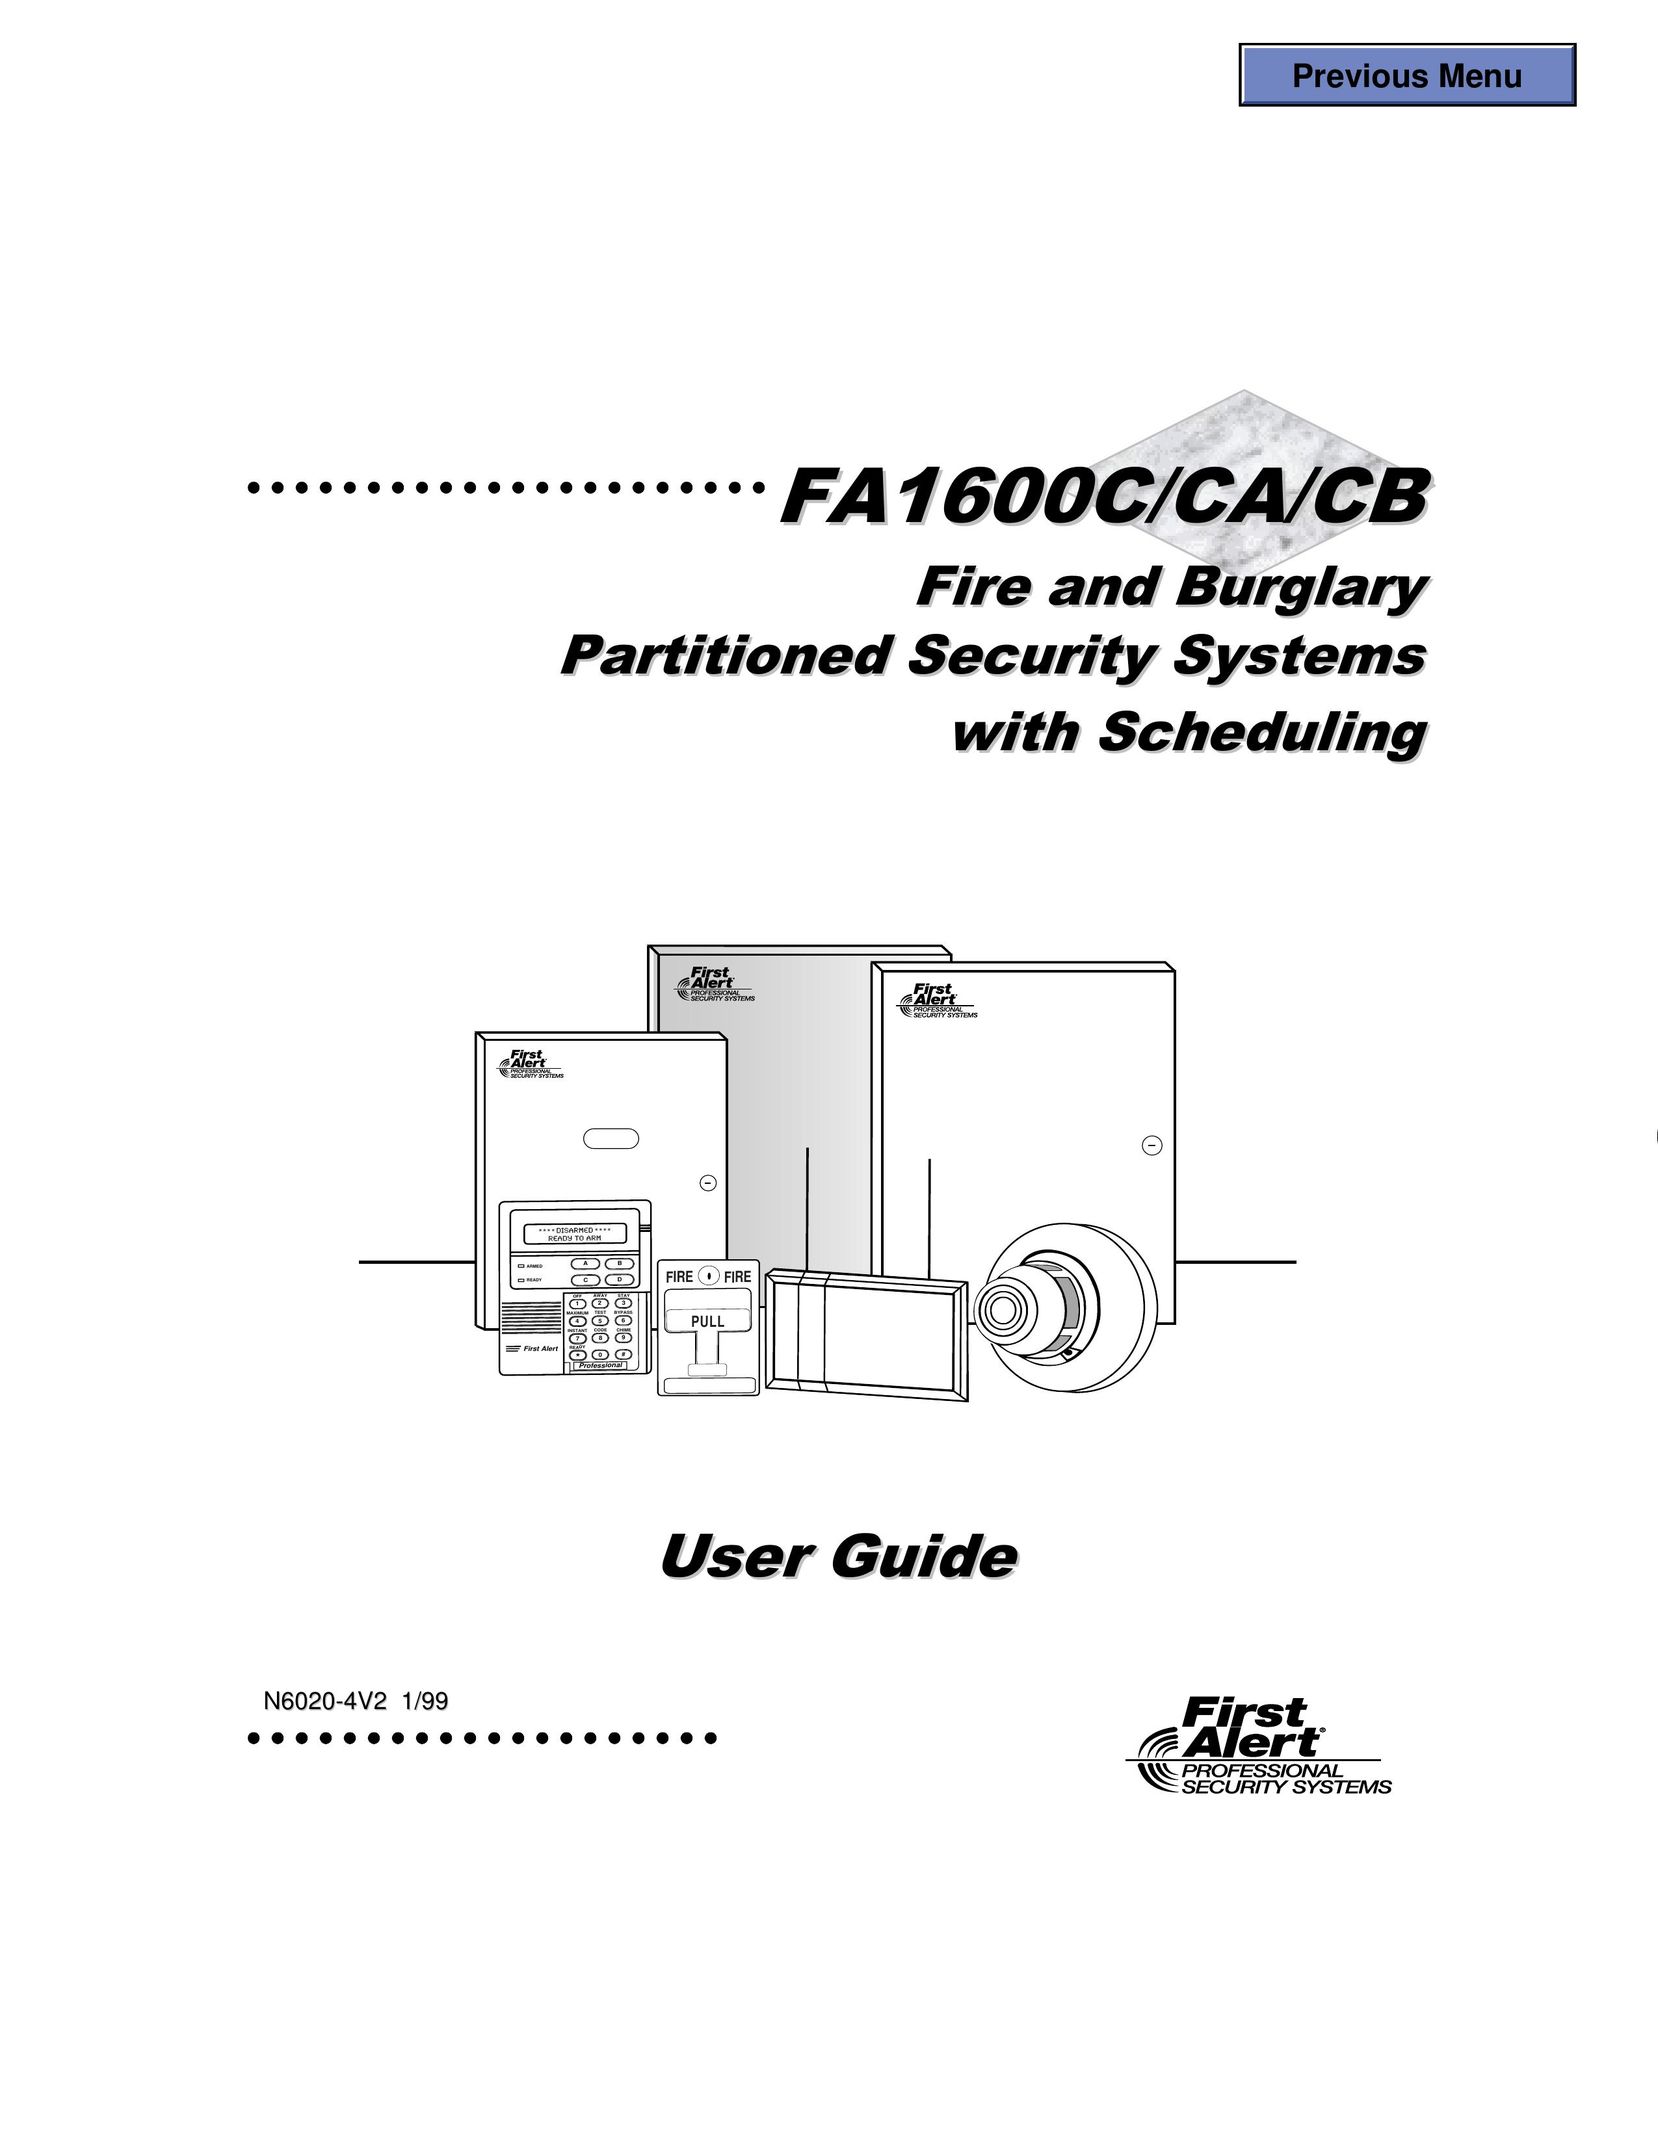 First Alert fa1600c Home Security System User Manual